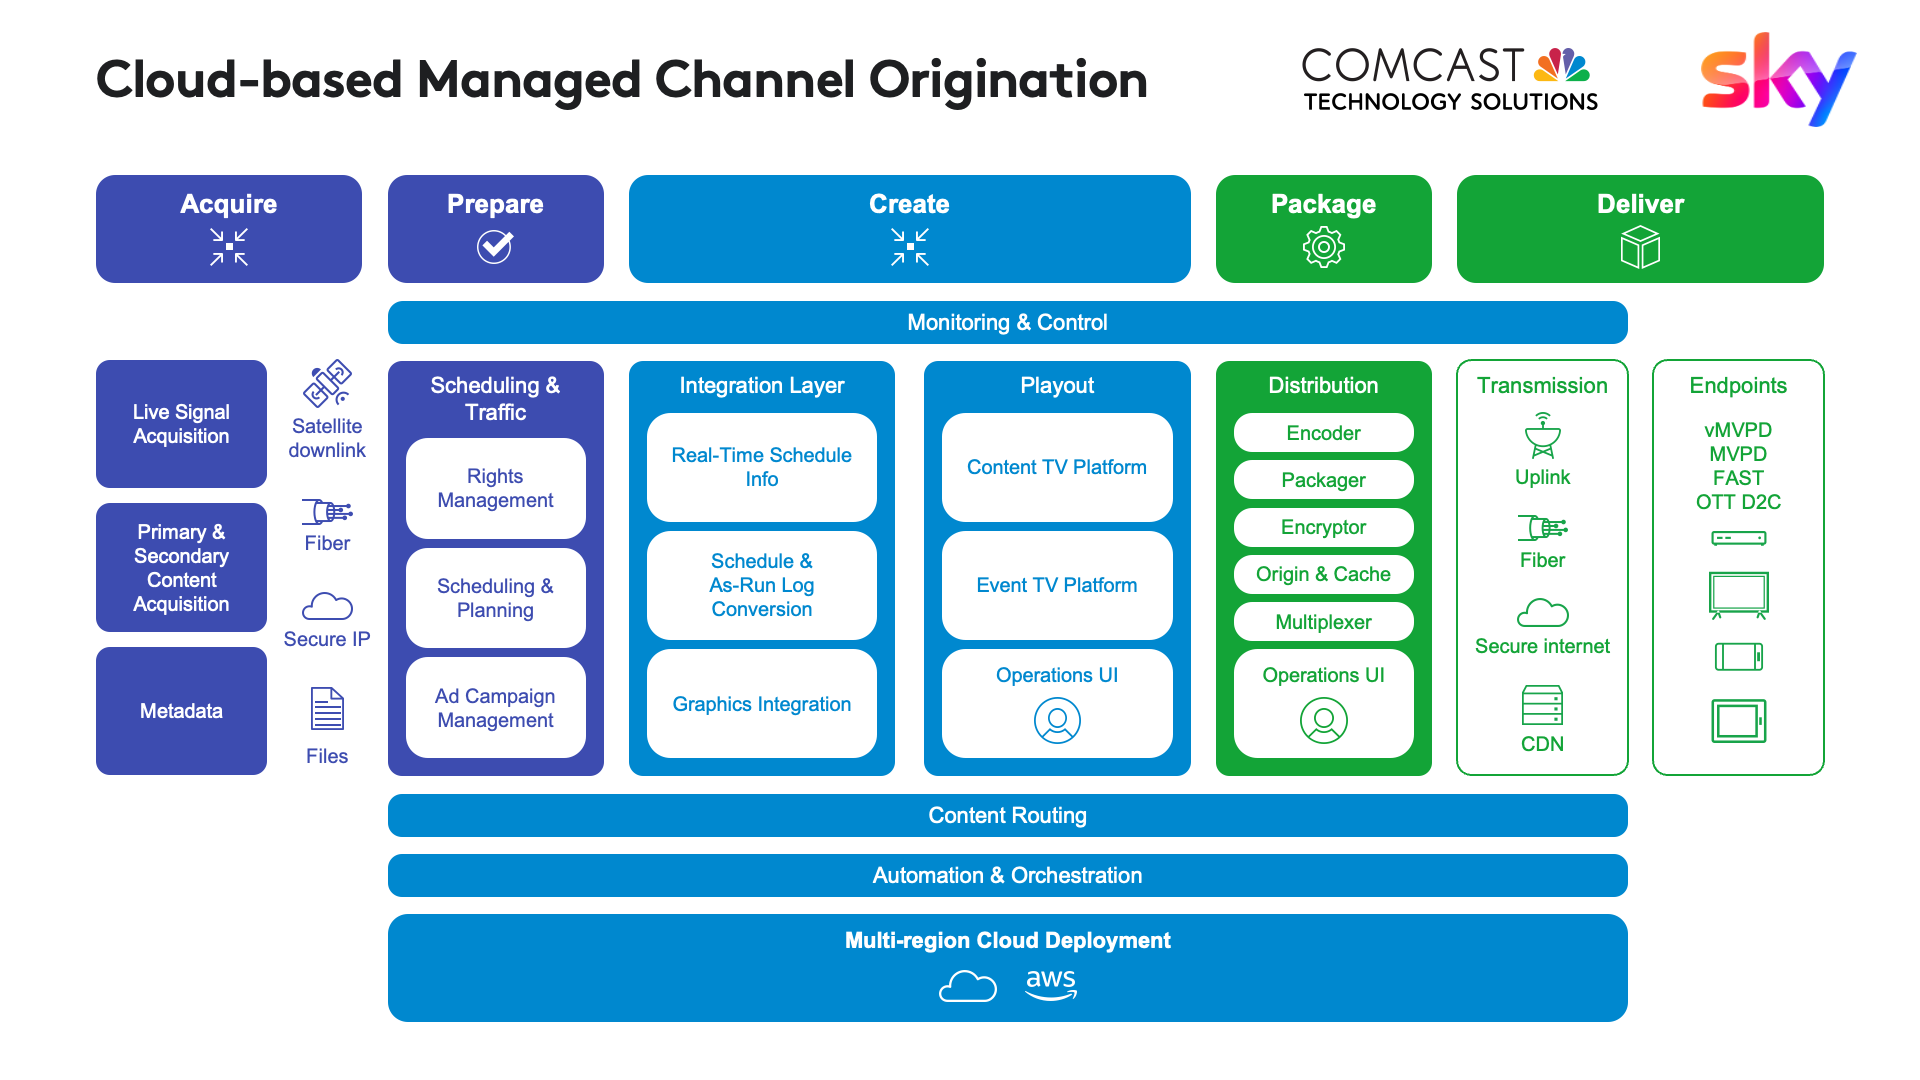 Comcast Technology Solutions announces new cloud-based Managed Channel Origination service for Europe